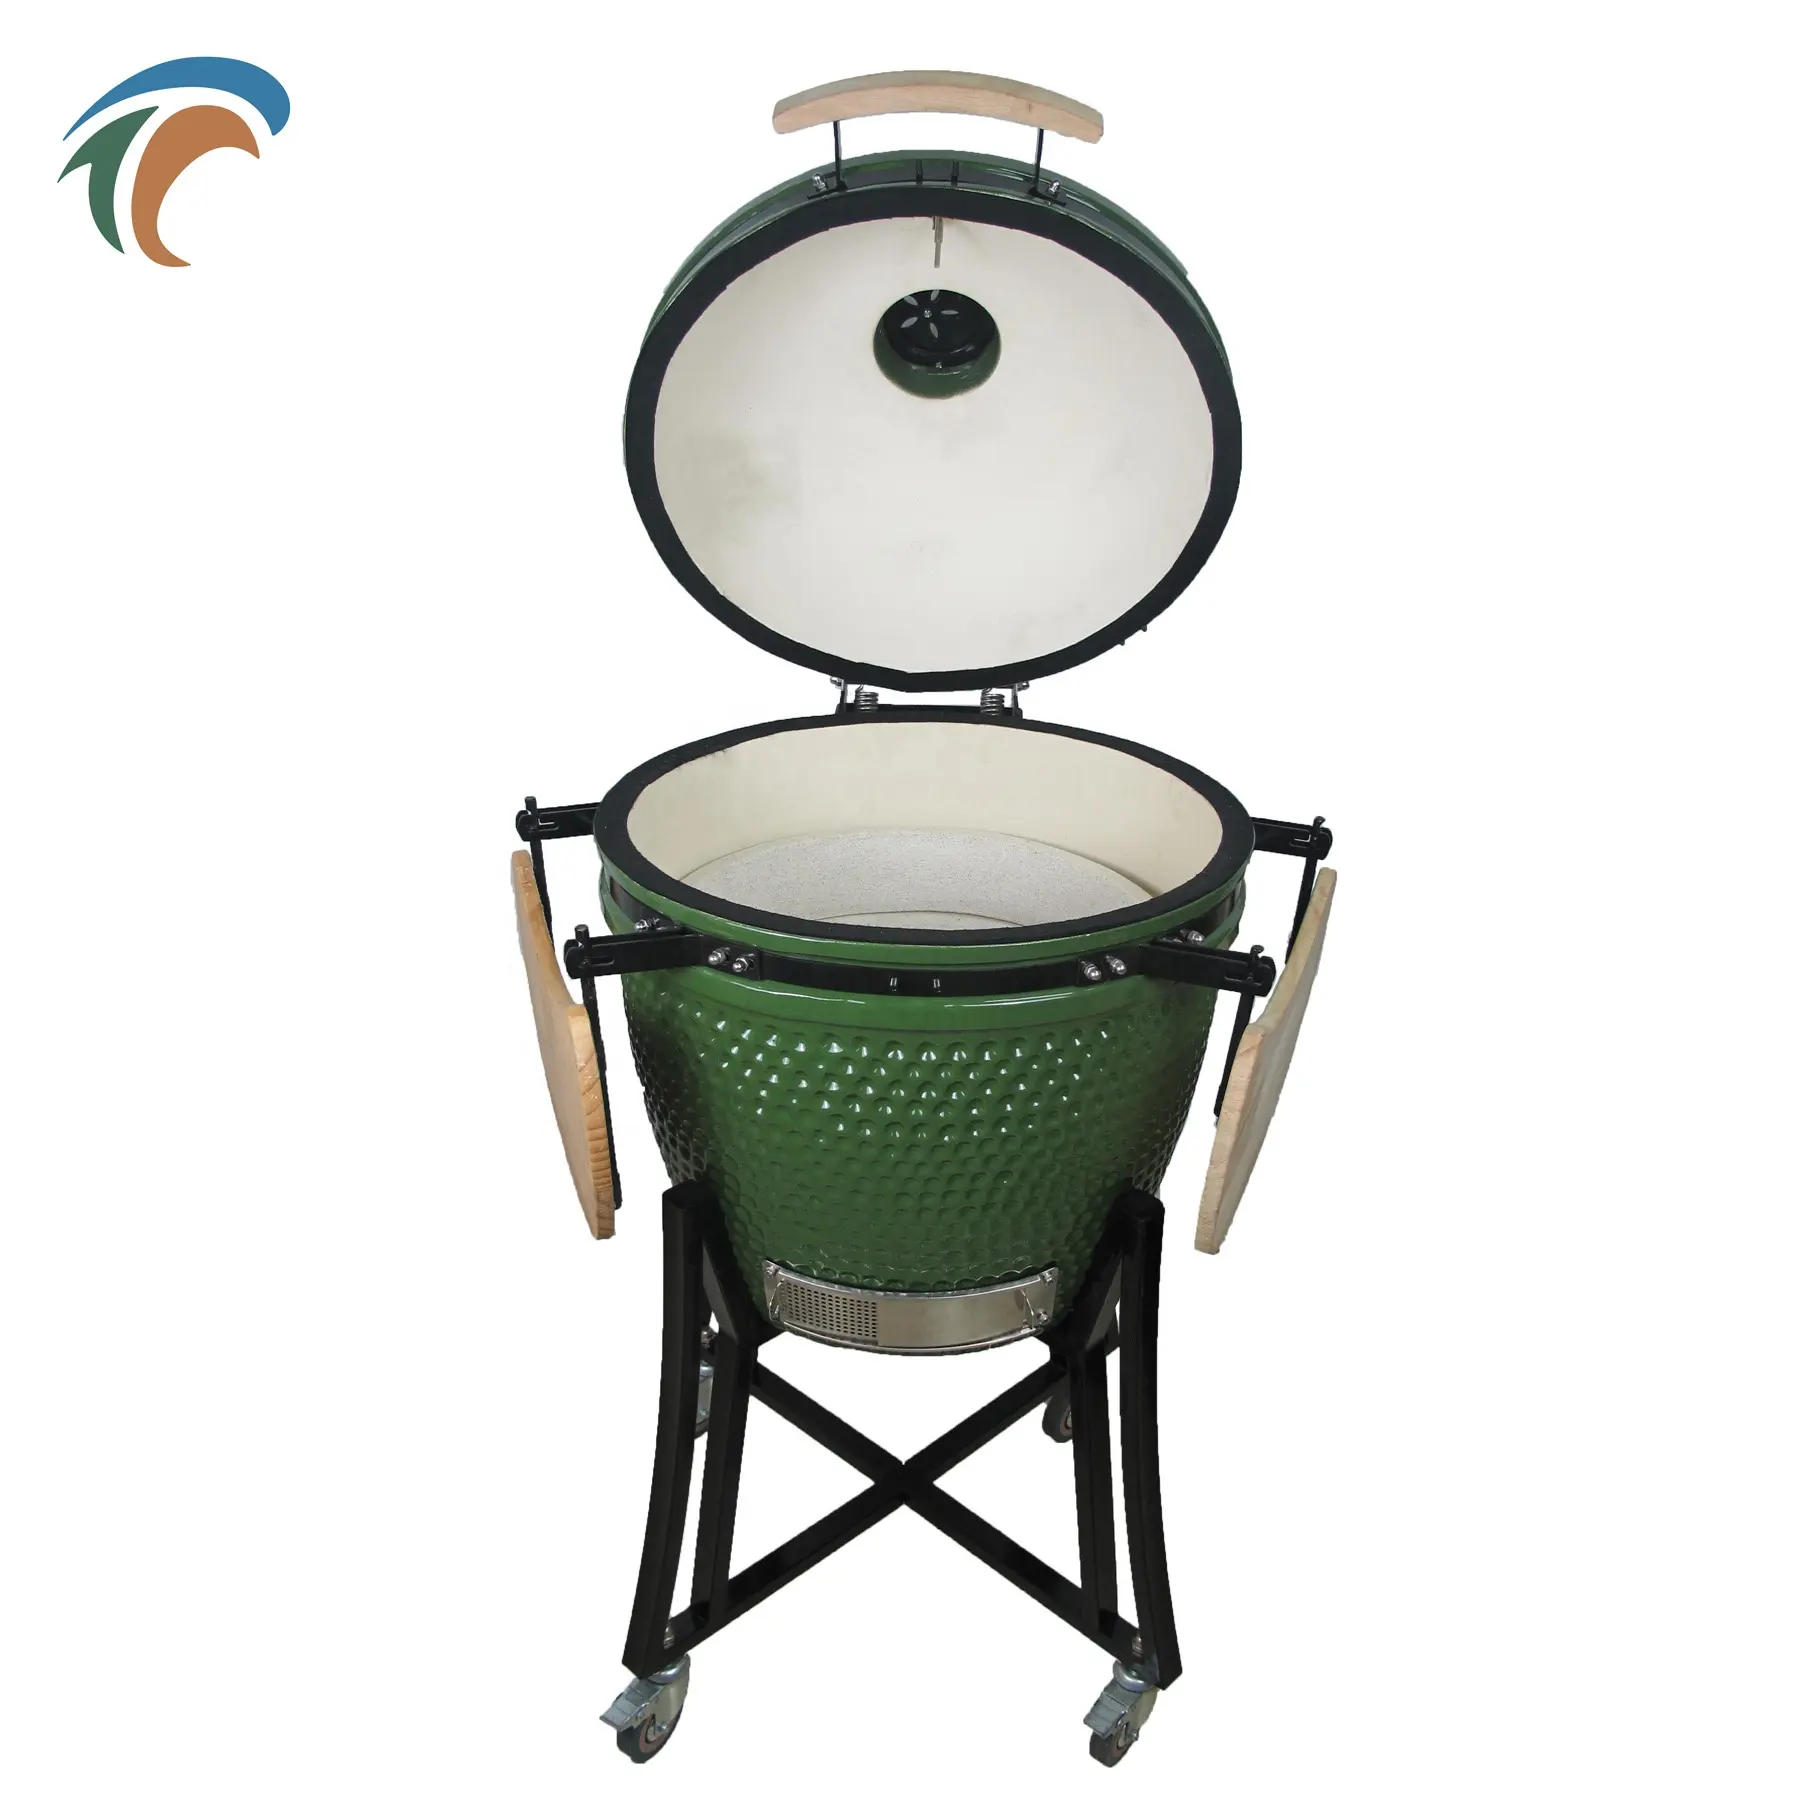 Bbq Kamado 22'' Charcoal Bbq Grill Ceramic Egg Barbecue Grill For Outdoor Indoor Home Or Garden